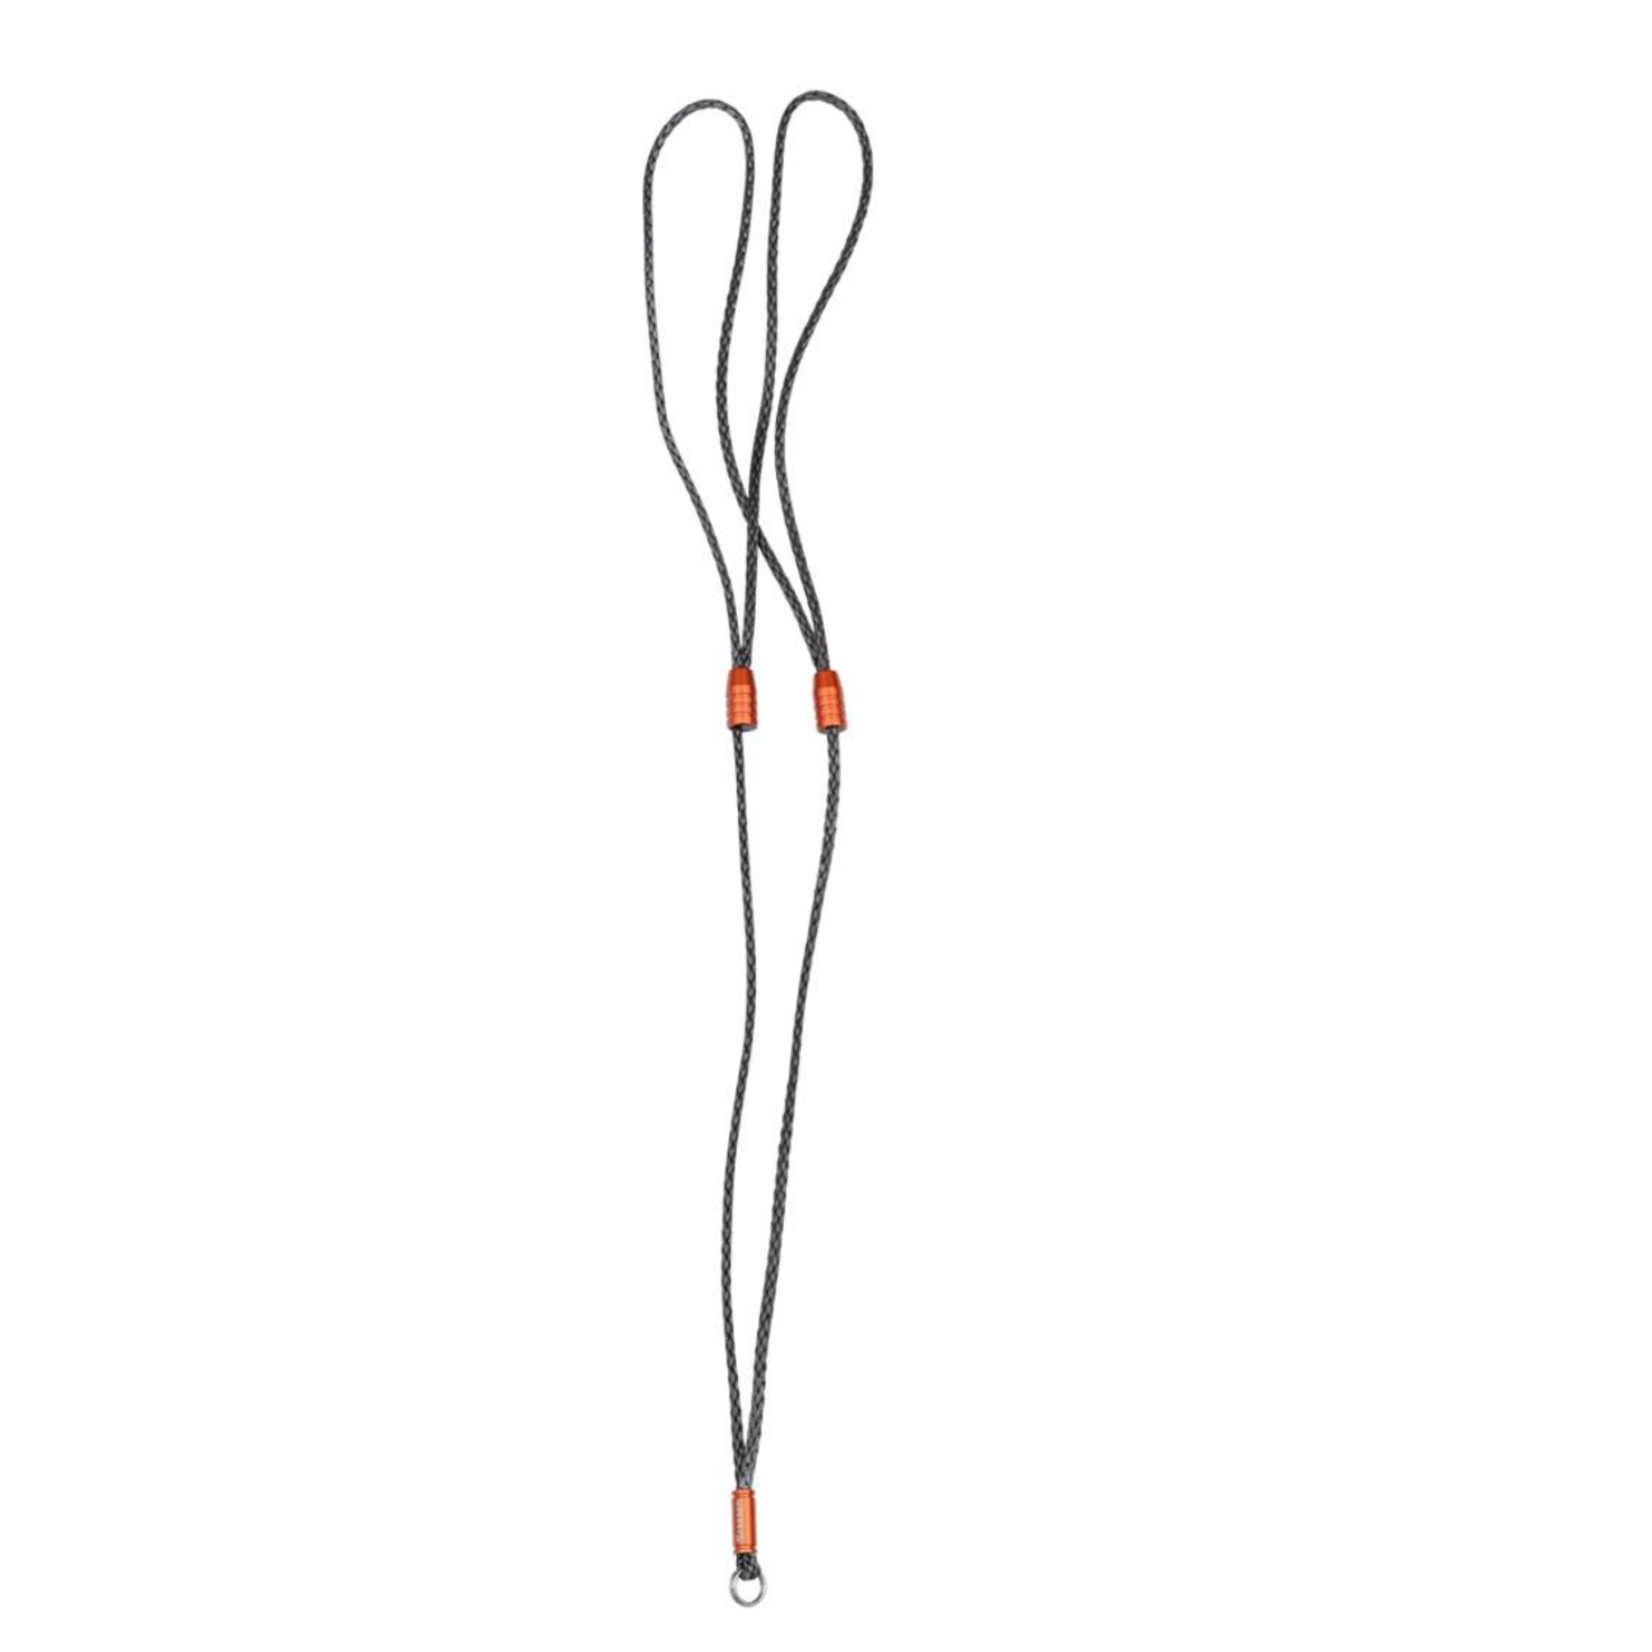 F19 SIMMS GUIDE LANYARD SIMMS ORANGE ONE SIZE - Black Dog Outdoor Sports